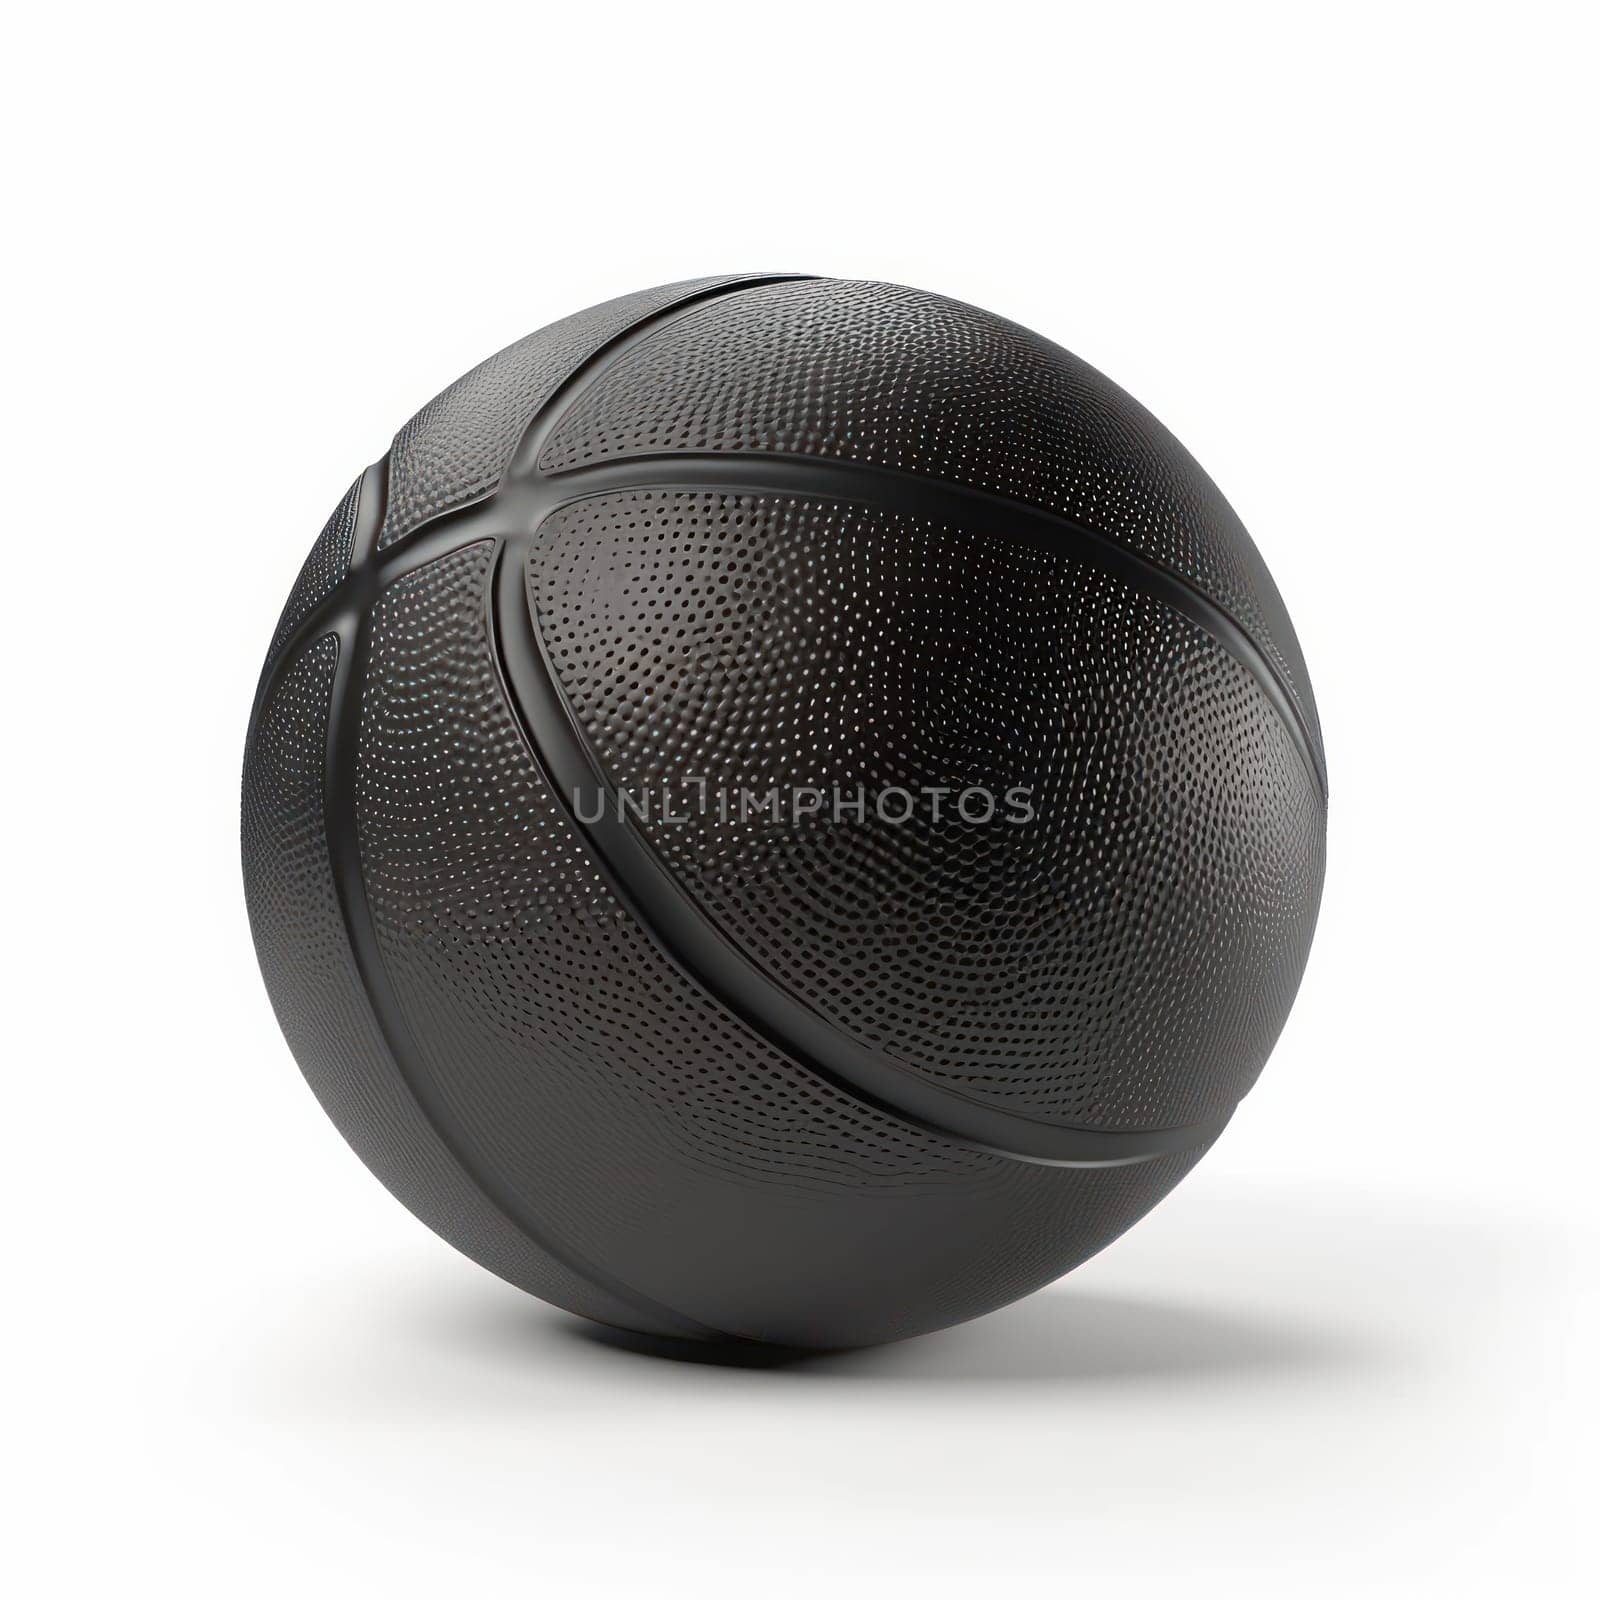 Clean and simple design of a white basketball with black lines by Sorapop